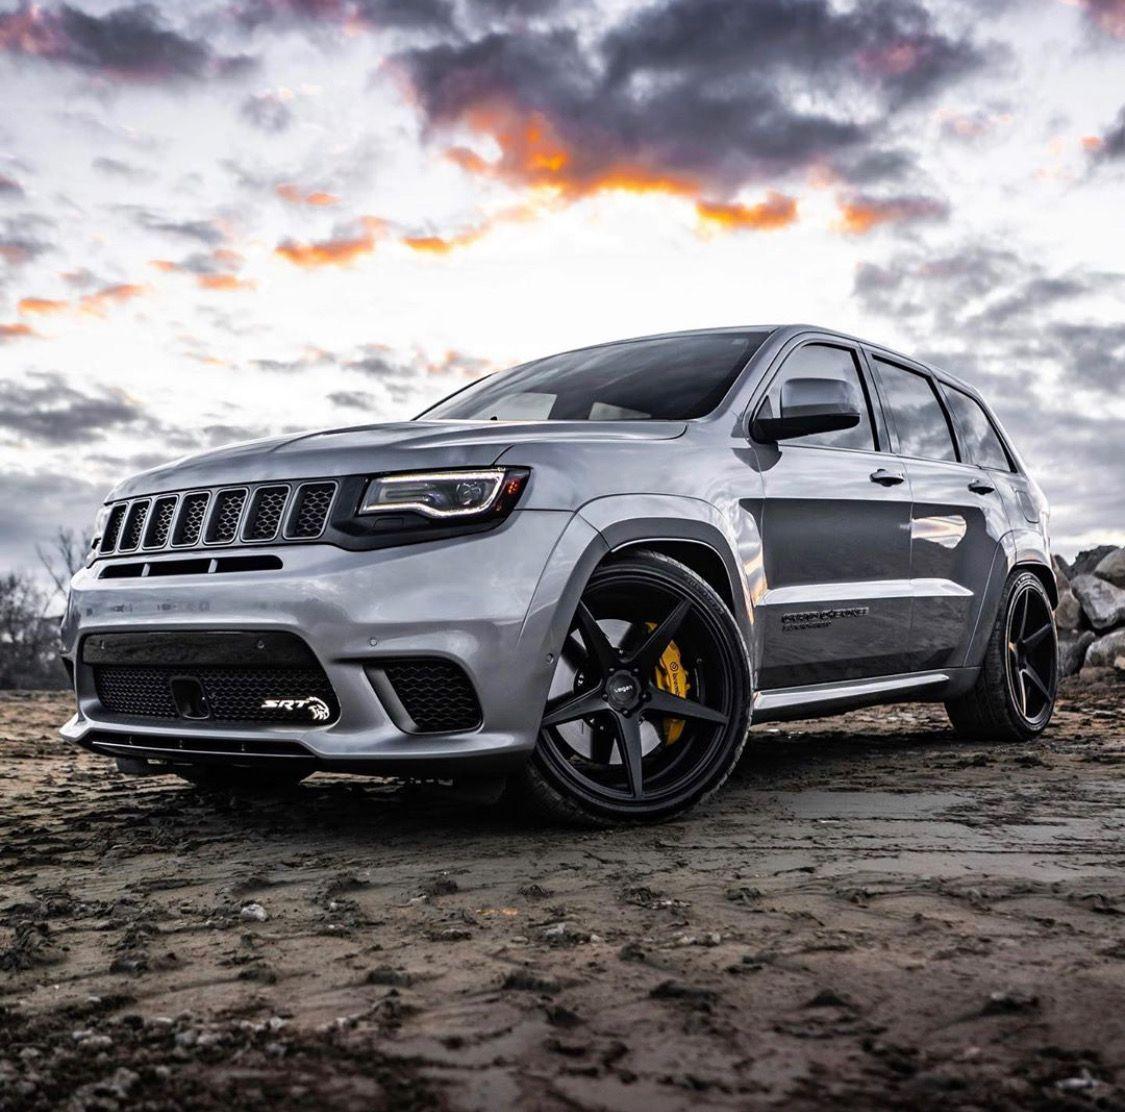 List 94+ Pictures Pictures Of A Trackhawk Stunning